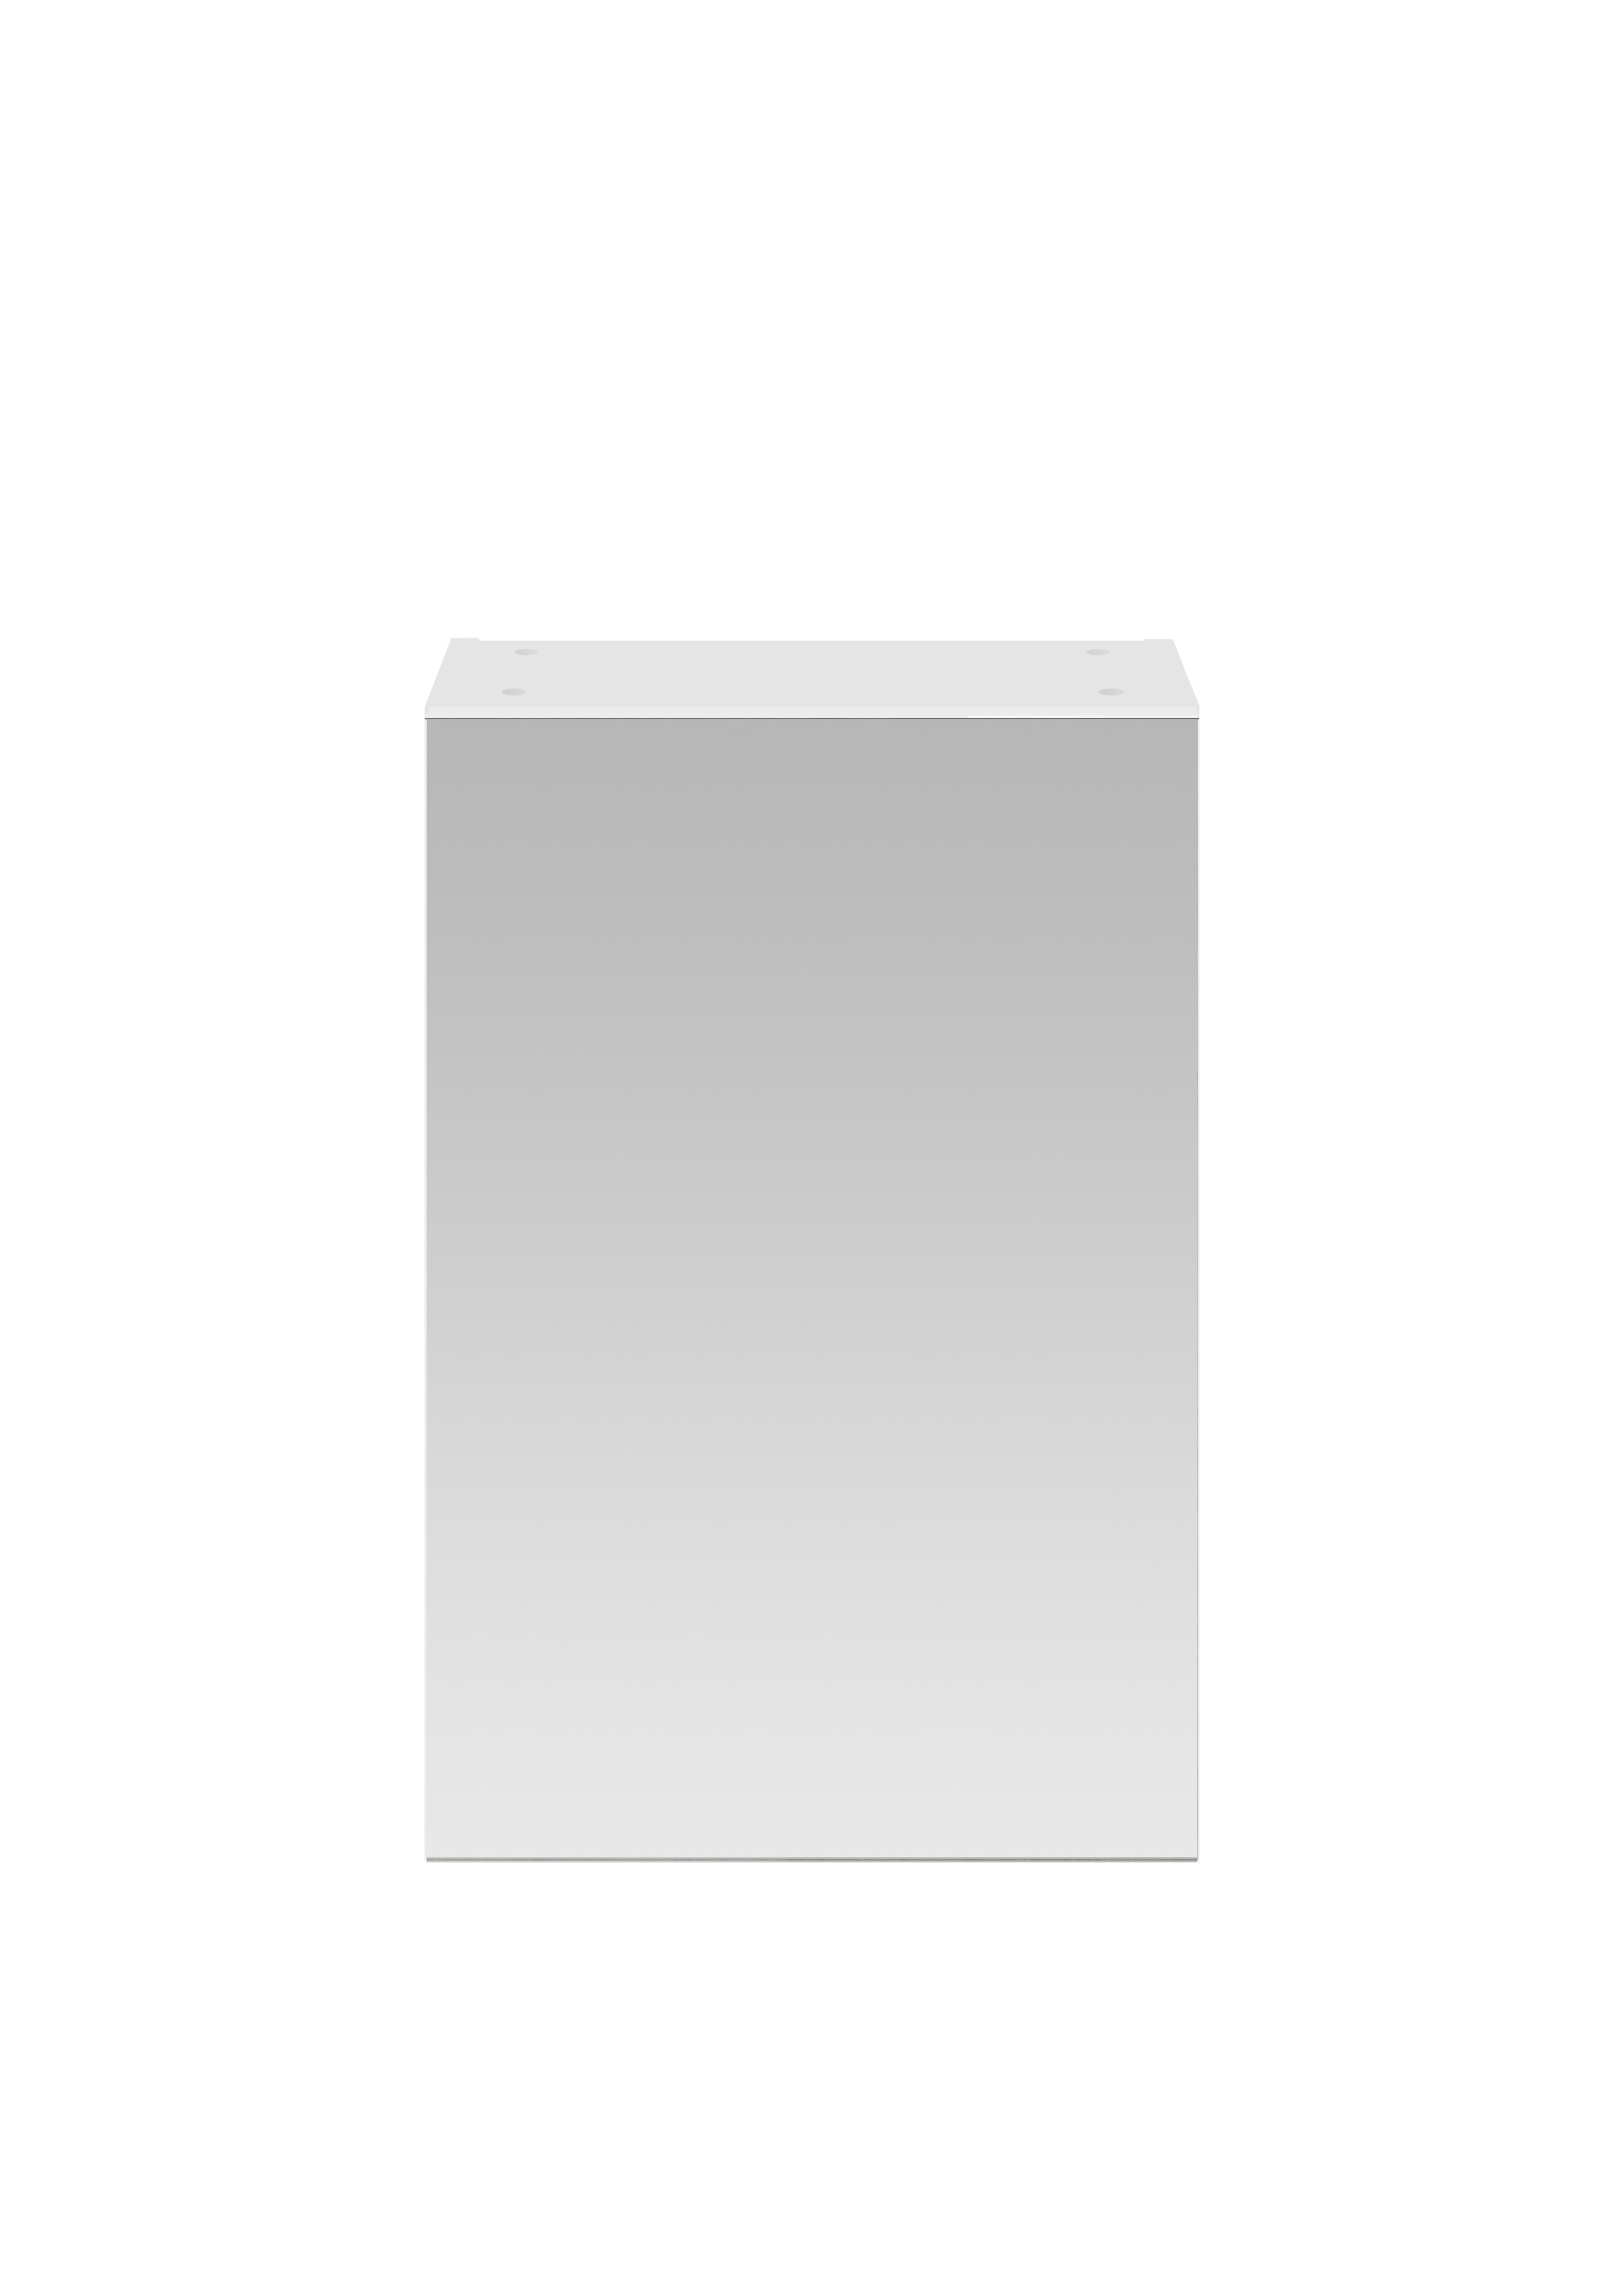 Nuie Athena 1-Door Mirrored Bathroom Cabinet 715mm Height x 450mm Wide - Gloss White - OFF116 